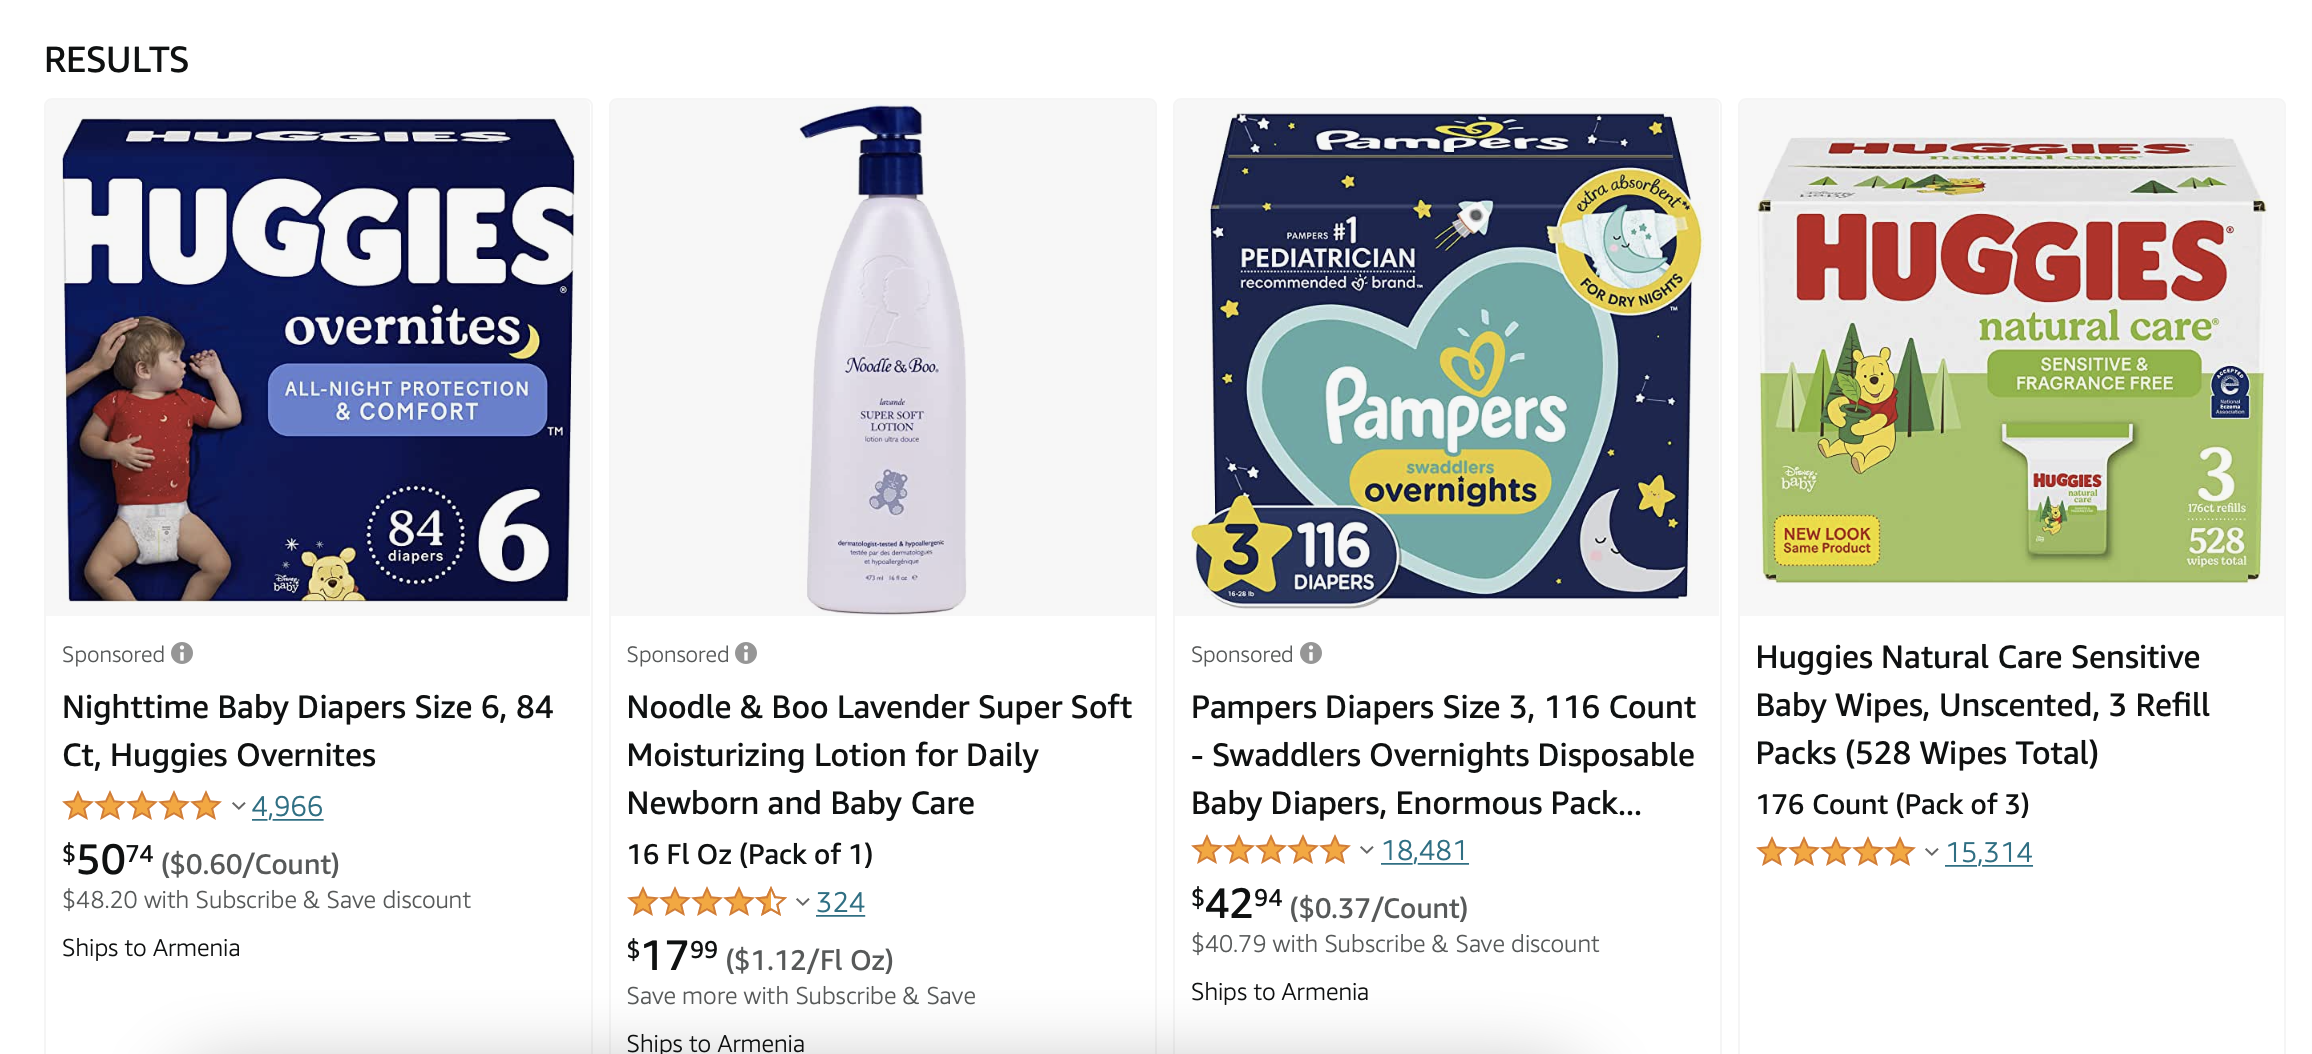 How to sell baby products on Amazon?